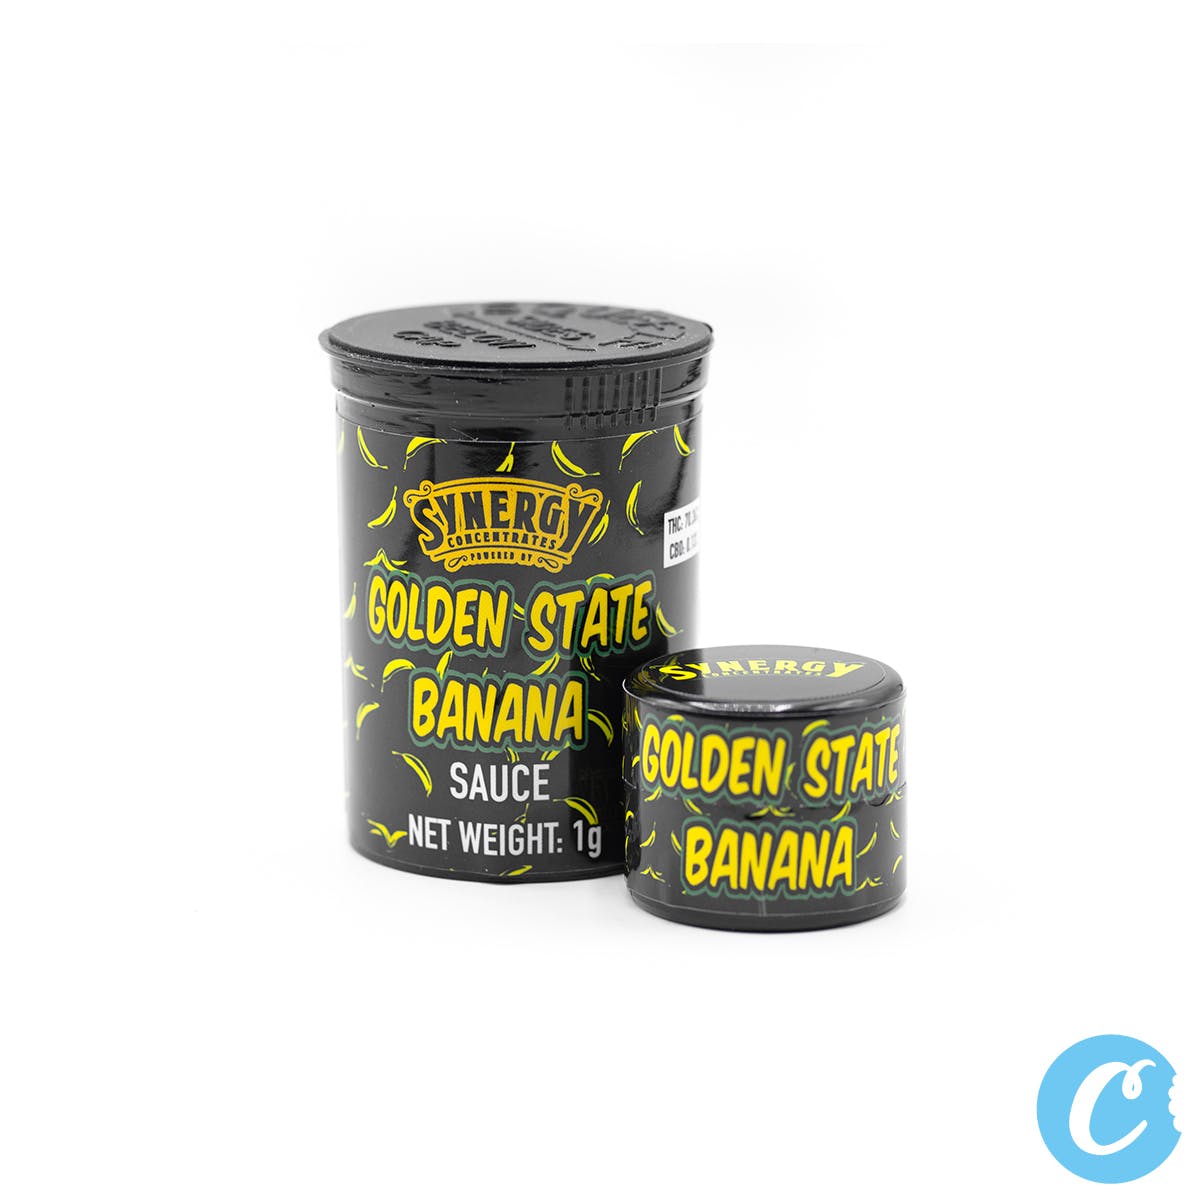 Golden State Banana Sauce by Synergy